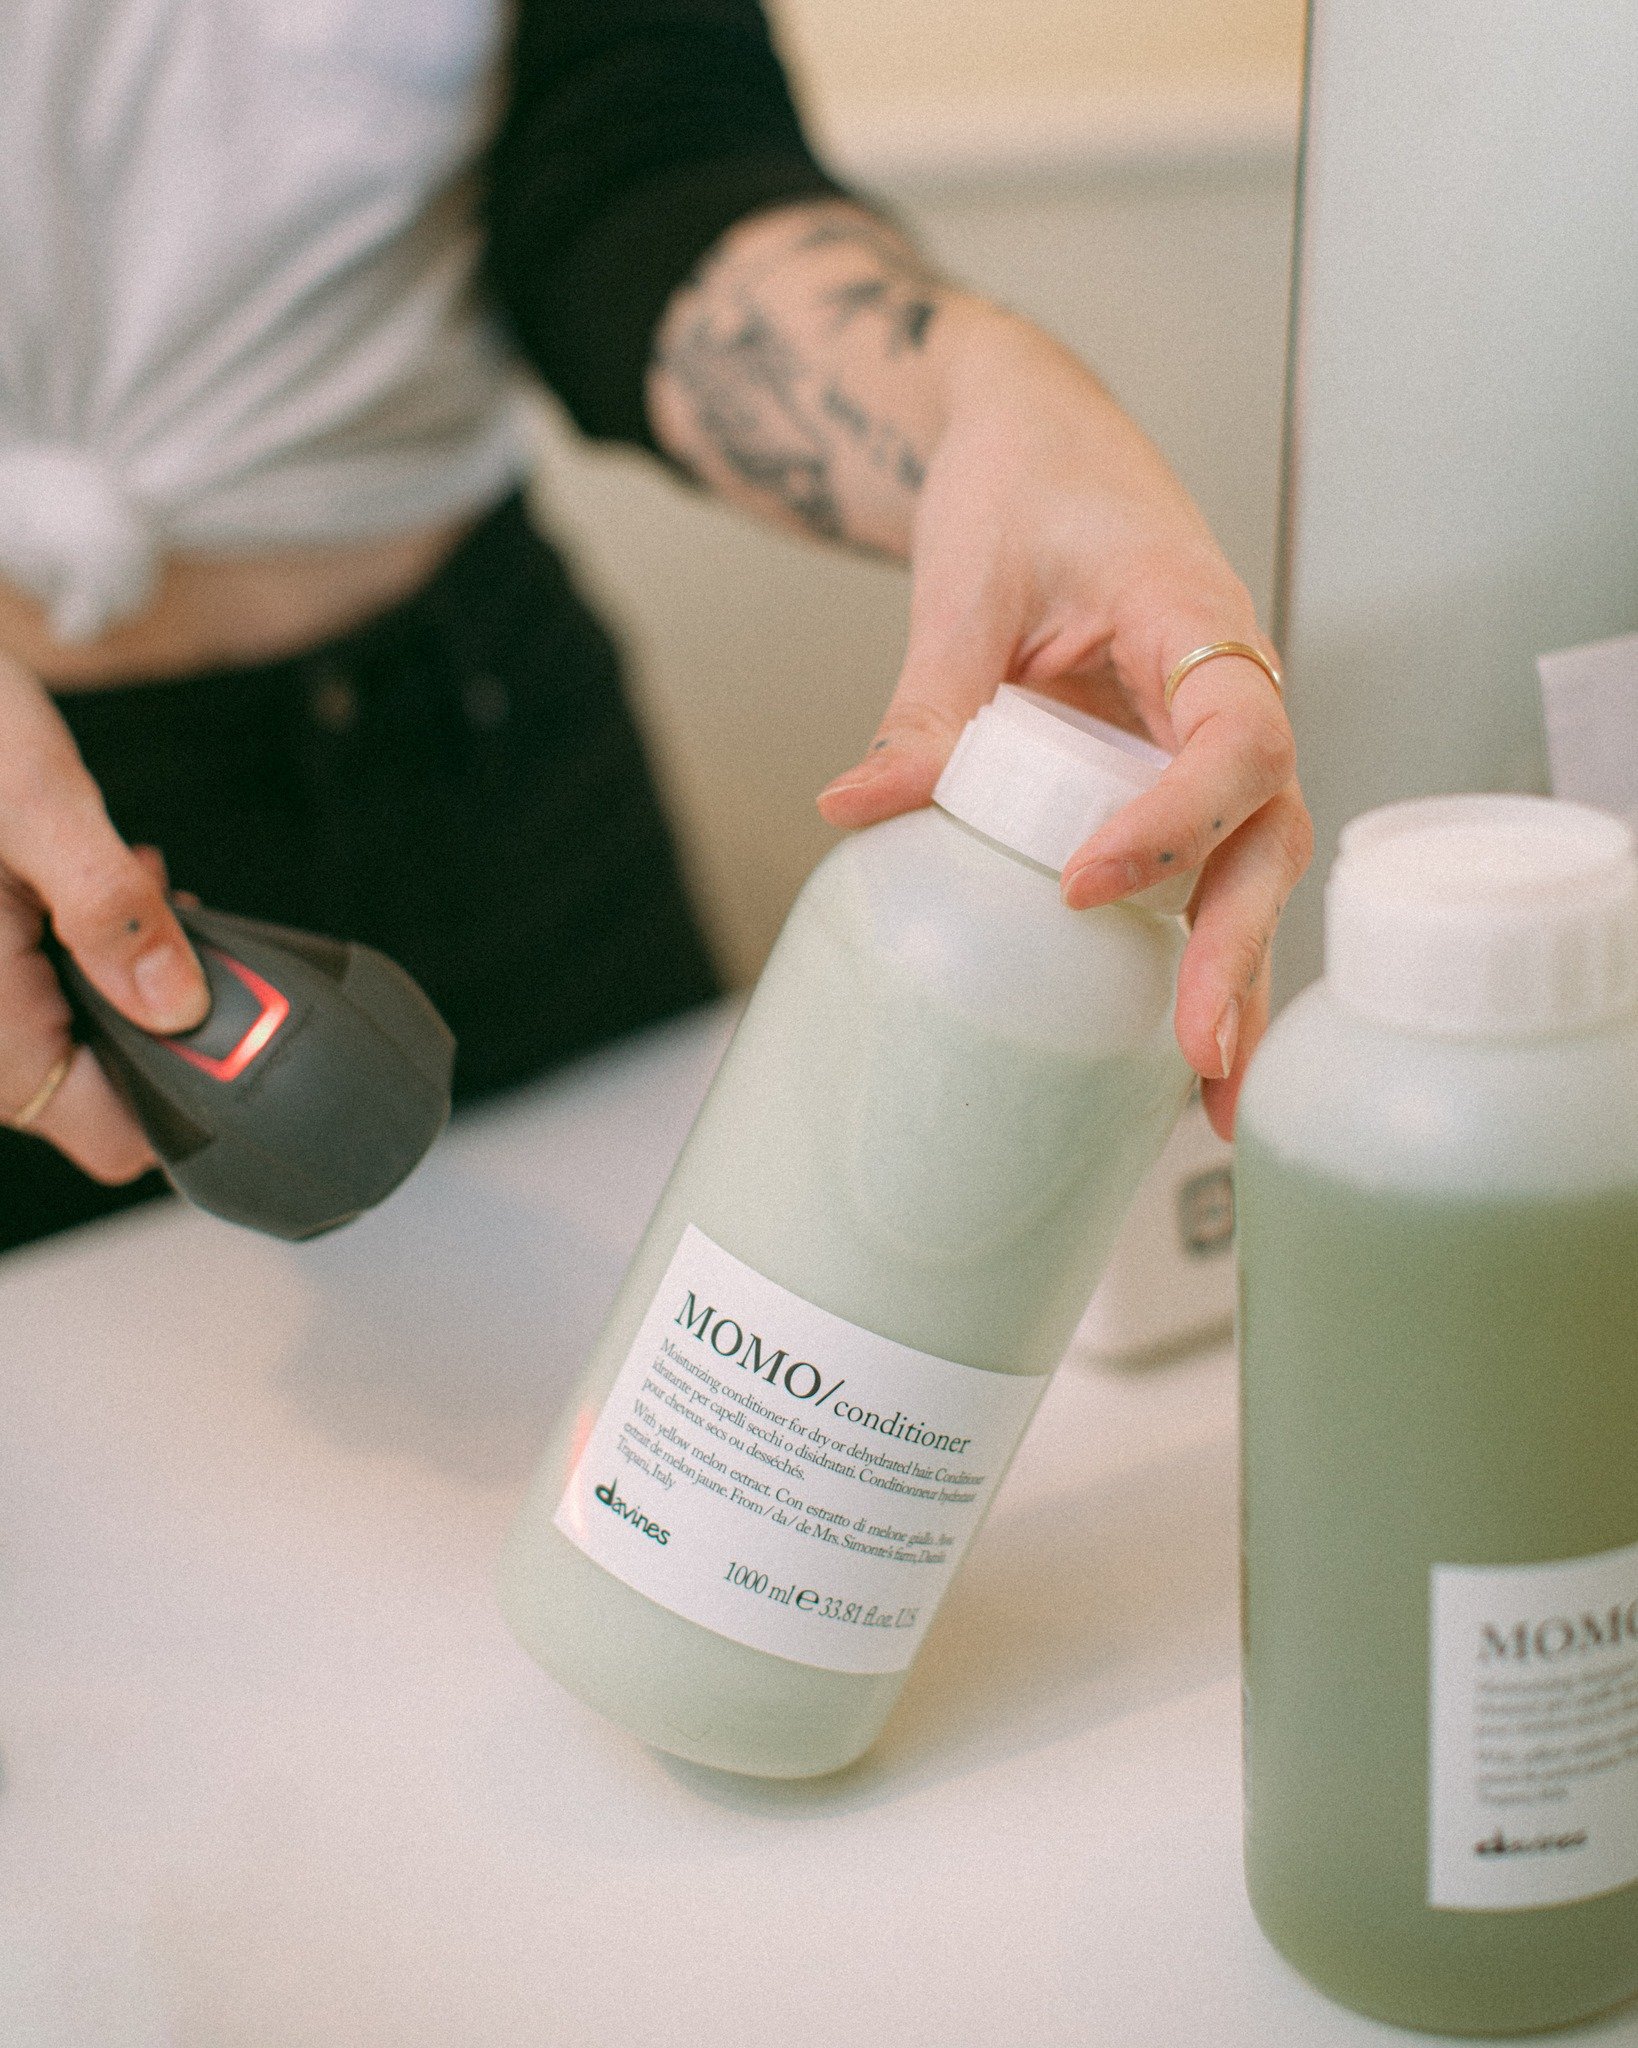 momo 💚

she's perfect for taming dry and dehydrated strands

don't forget to stock up with 20% off any liter of shampoo or conditioner

offer ends june first

#davines #davinesnorthamerica #davinesproducts #davinesprofessional #davinesshampoo #hihon